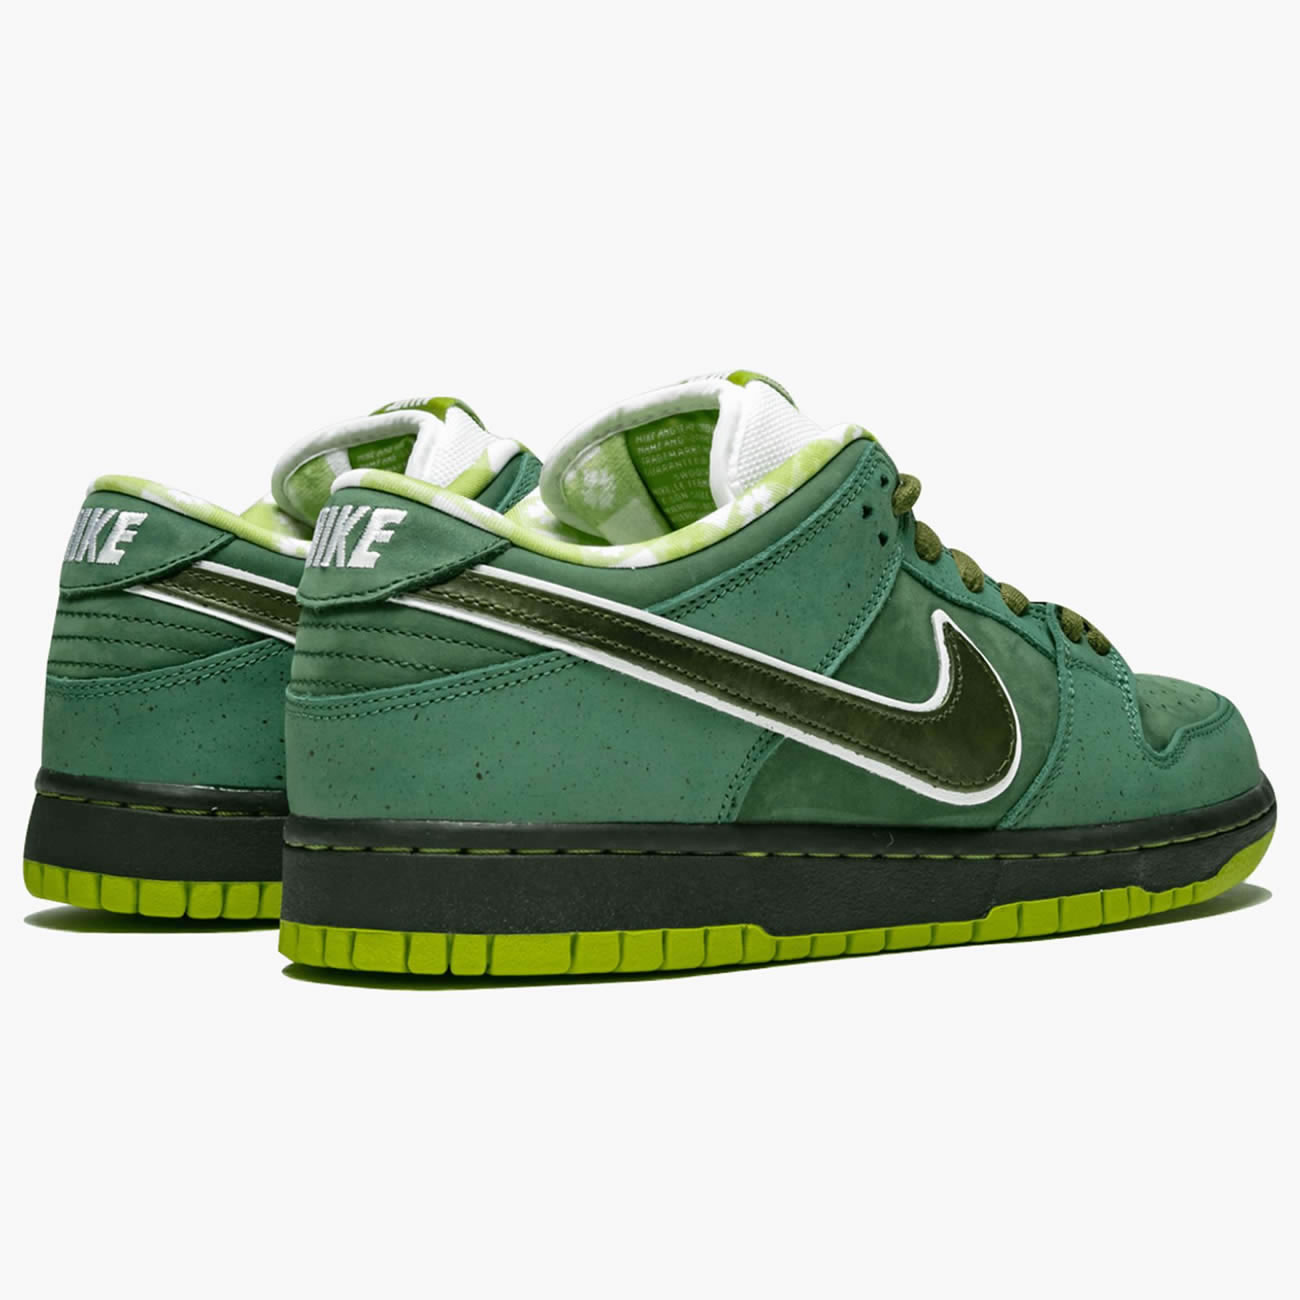 Nike Sb Dunk Low Concepts Green Lobster Bc1310 337 (3) - newkick.org